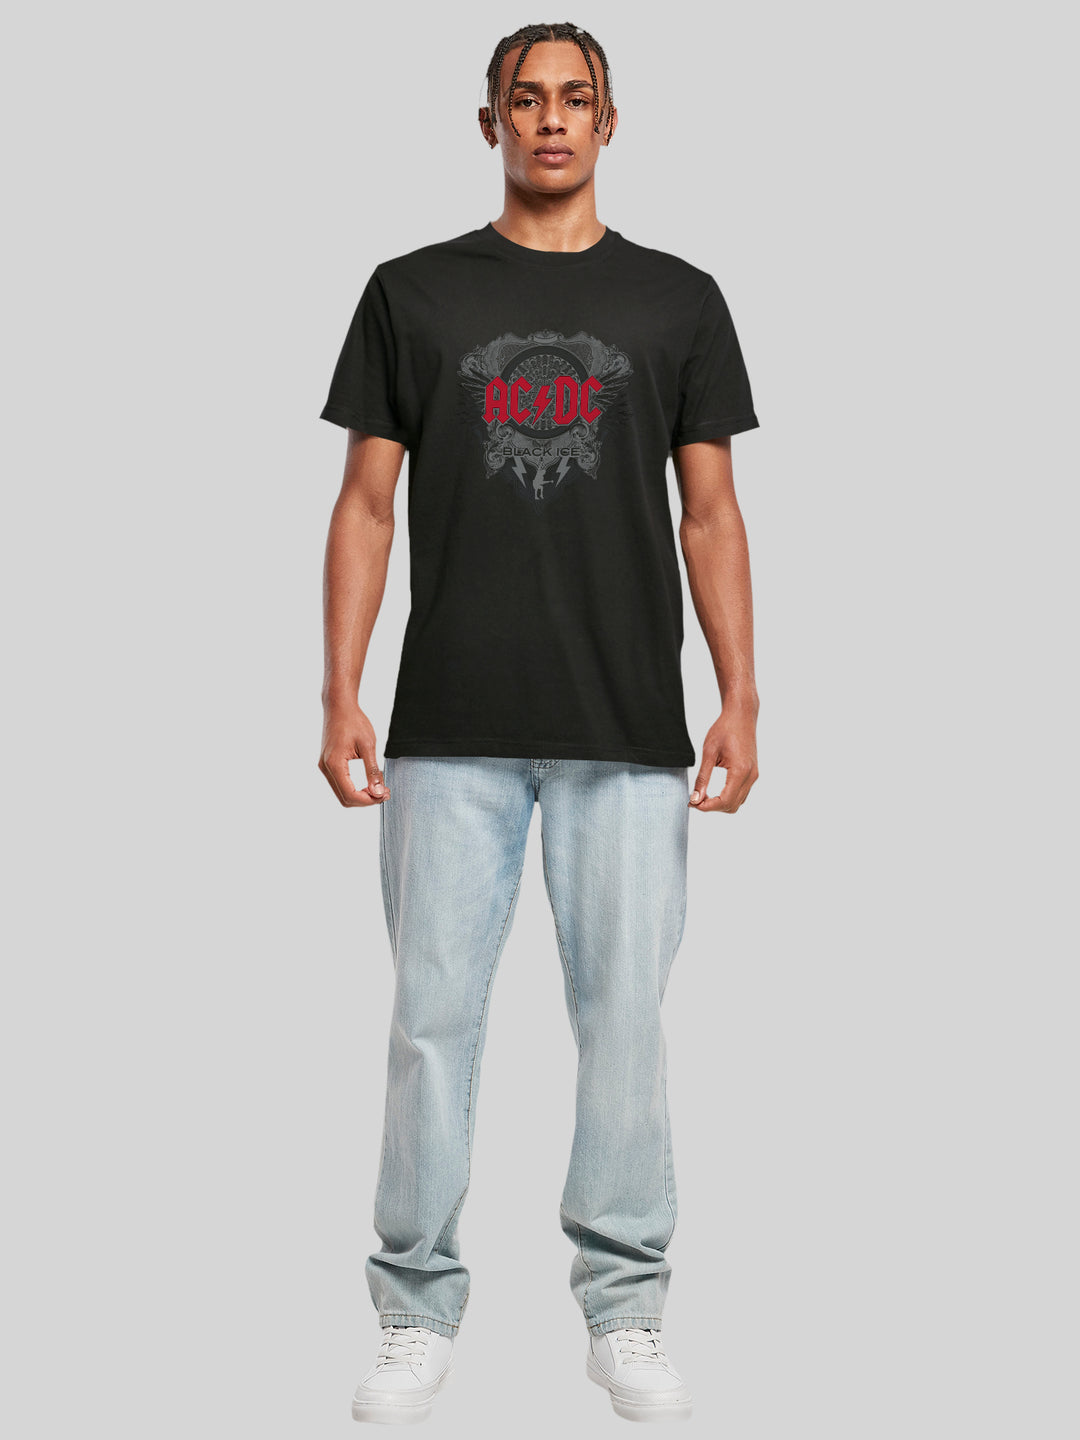 AC/DC Black Ice Red Round Neck T-Shirt - Bold Rock 'n' Roll Style Tailored for Comfort